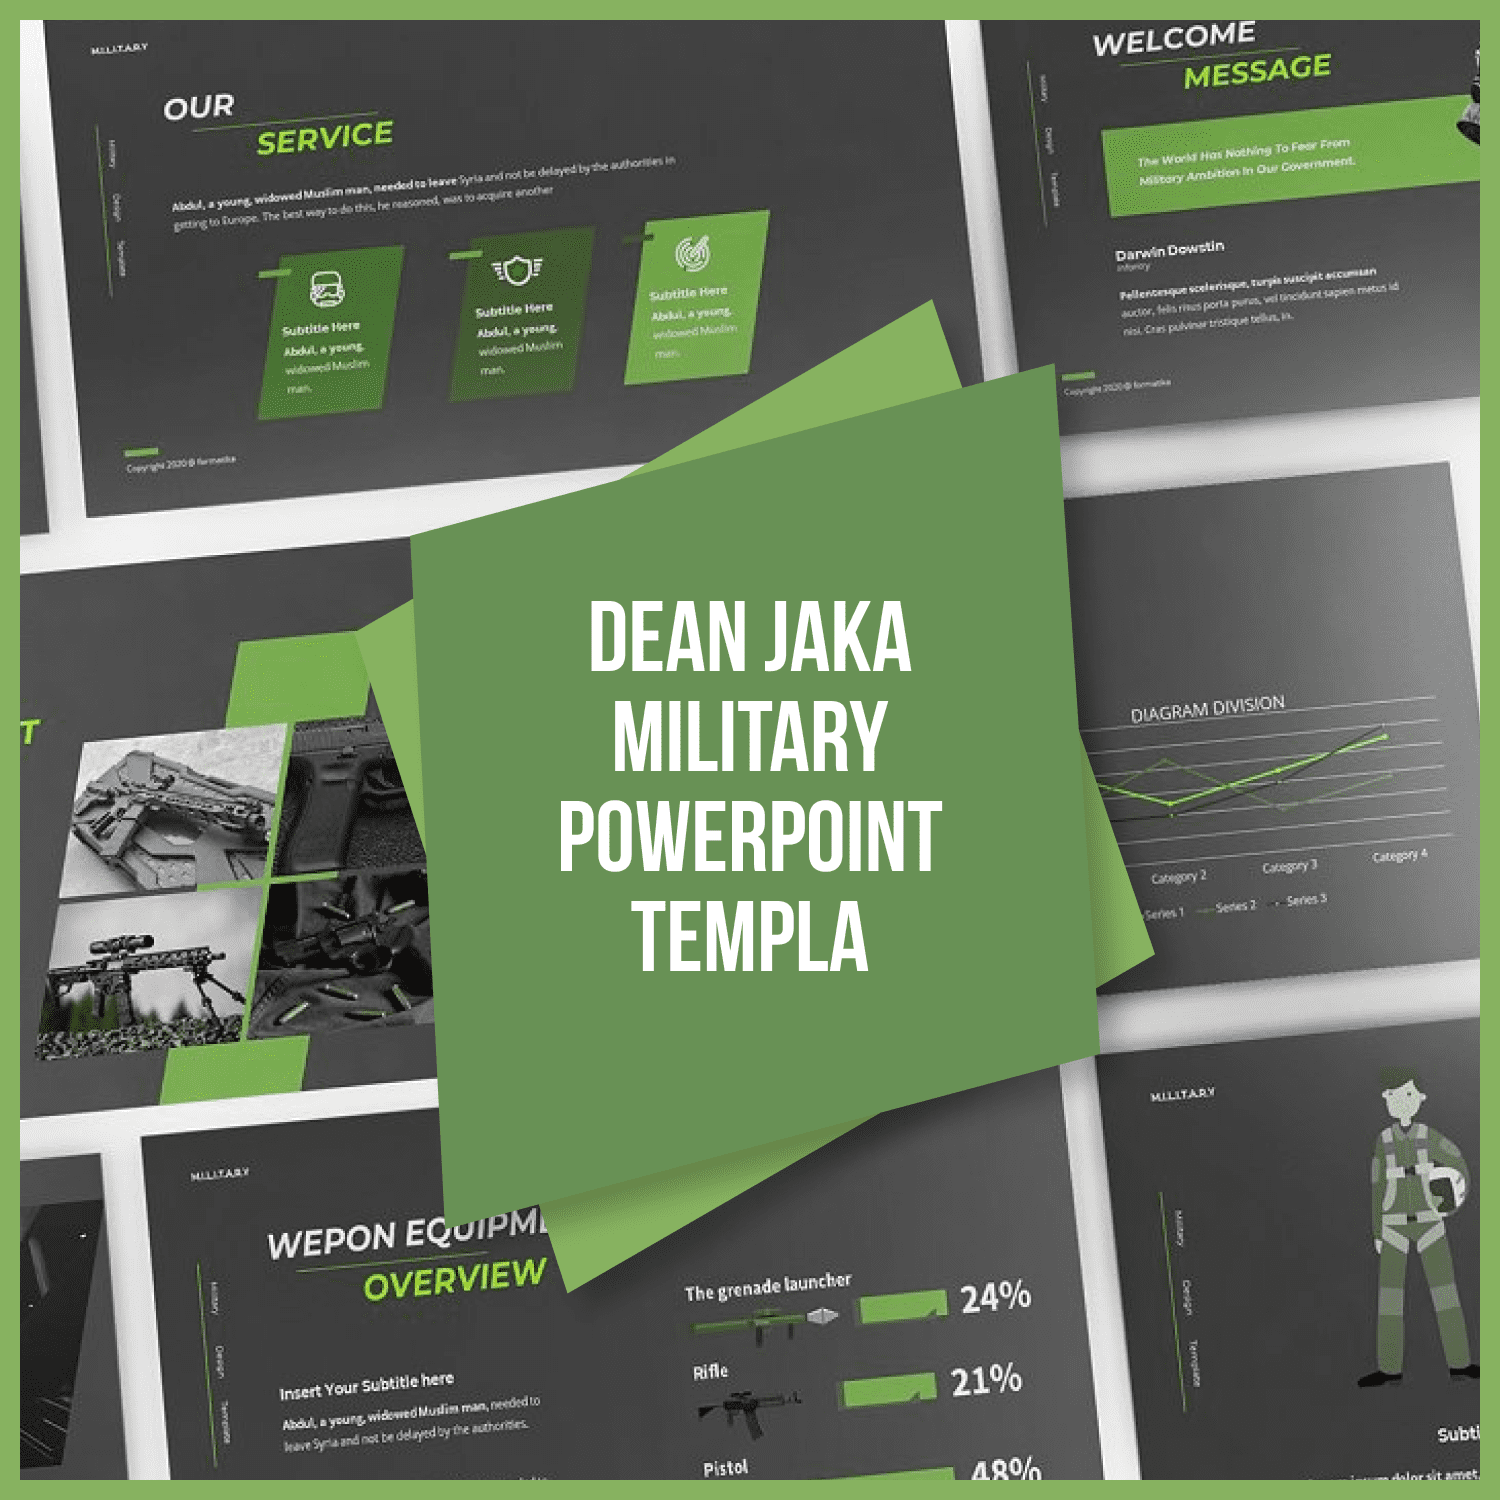 Dean Jaka Military Powerpoint Template main cover.